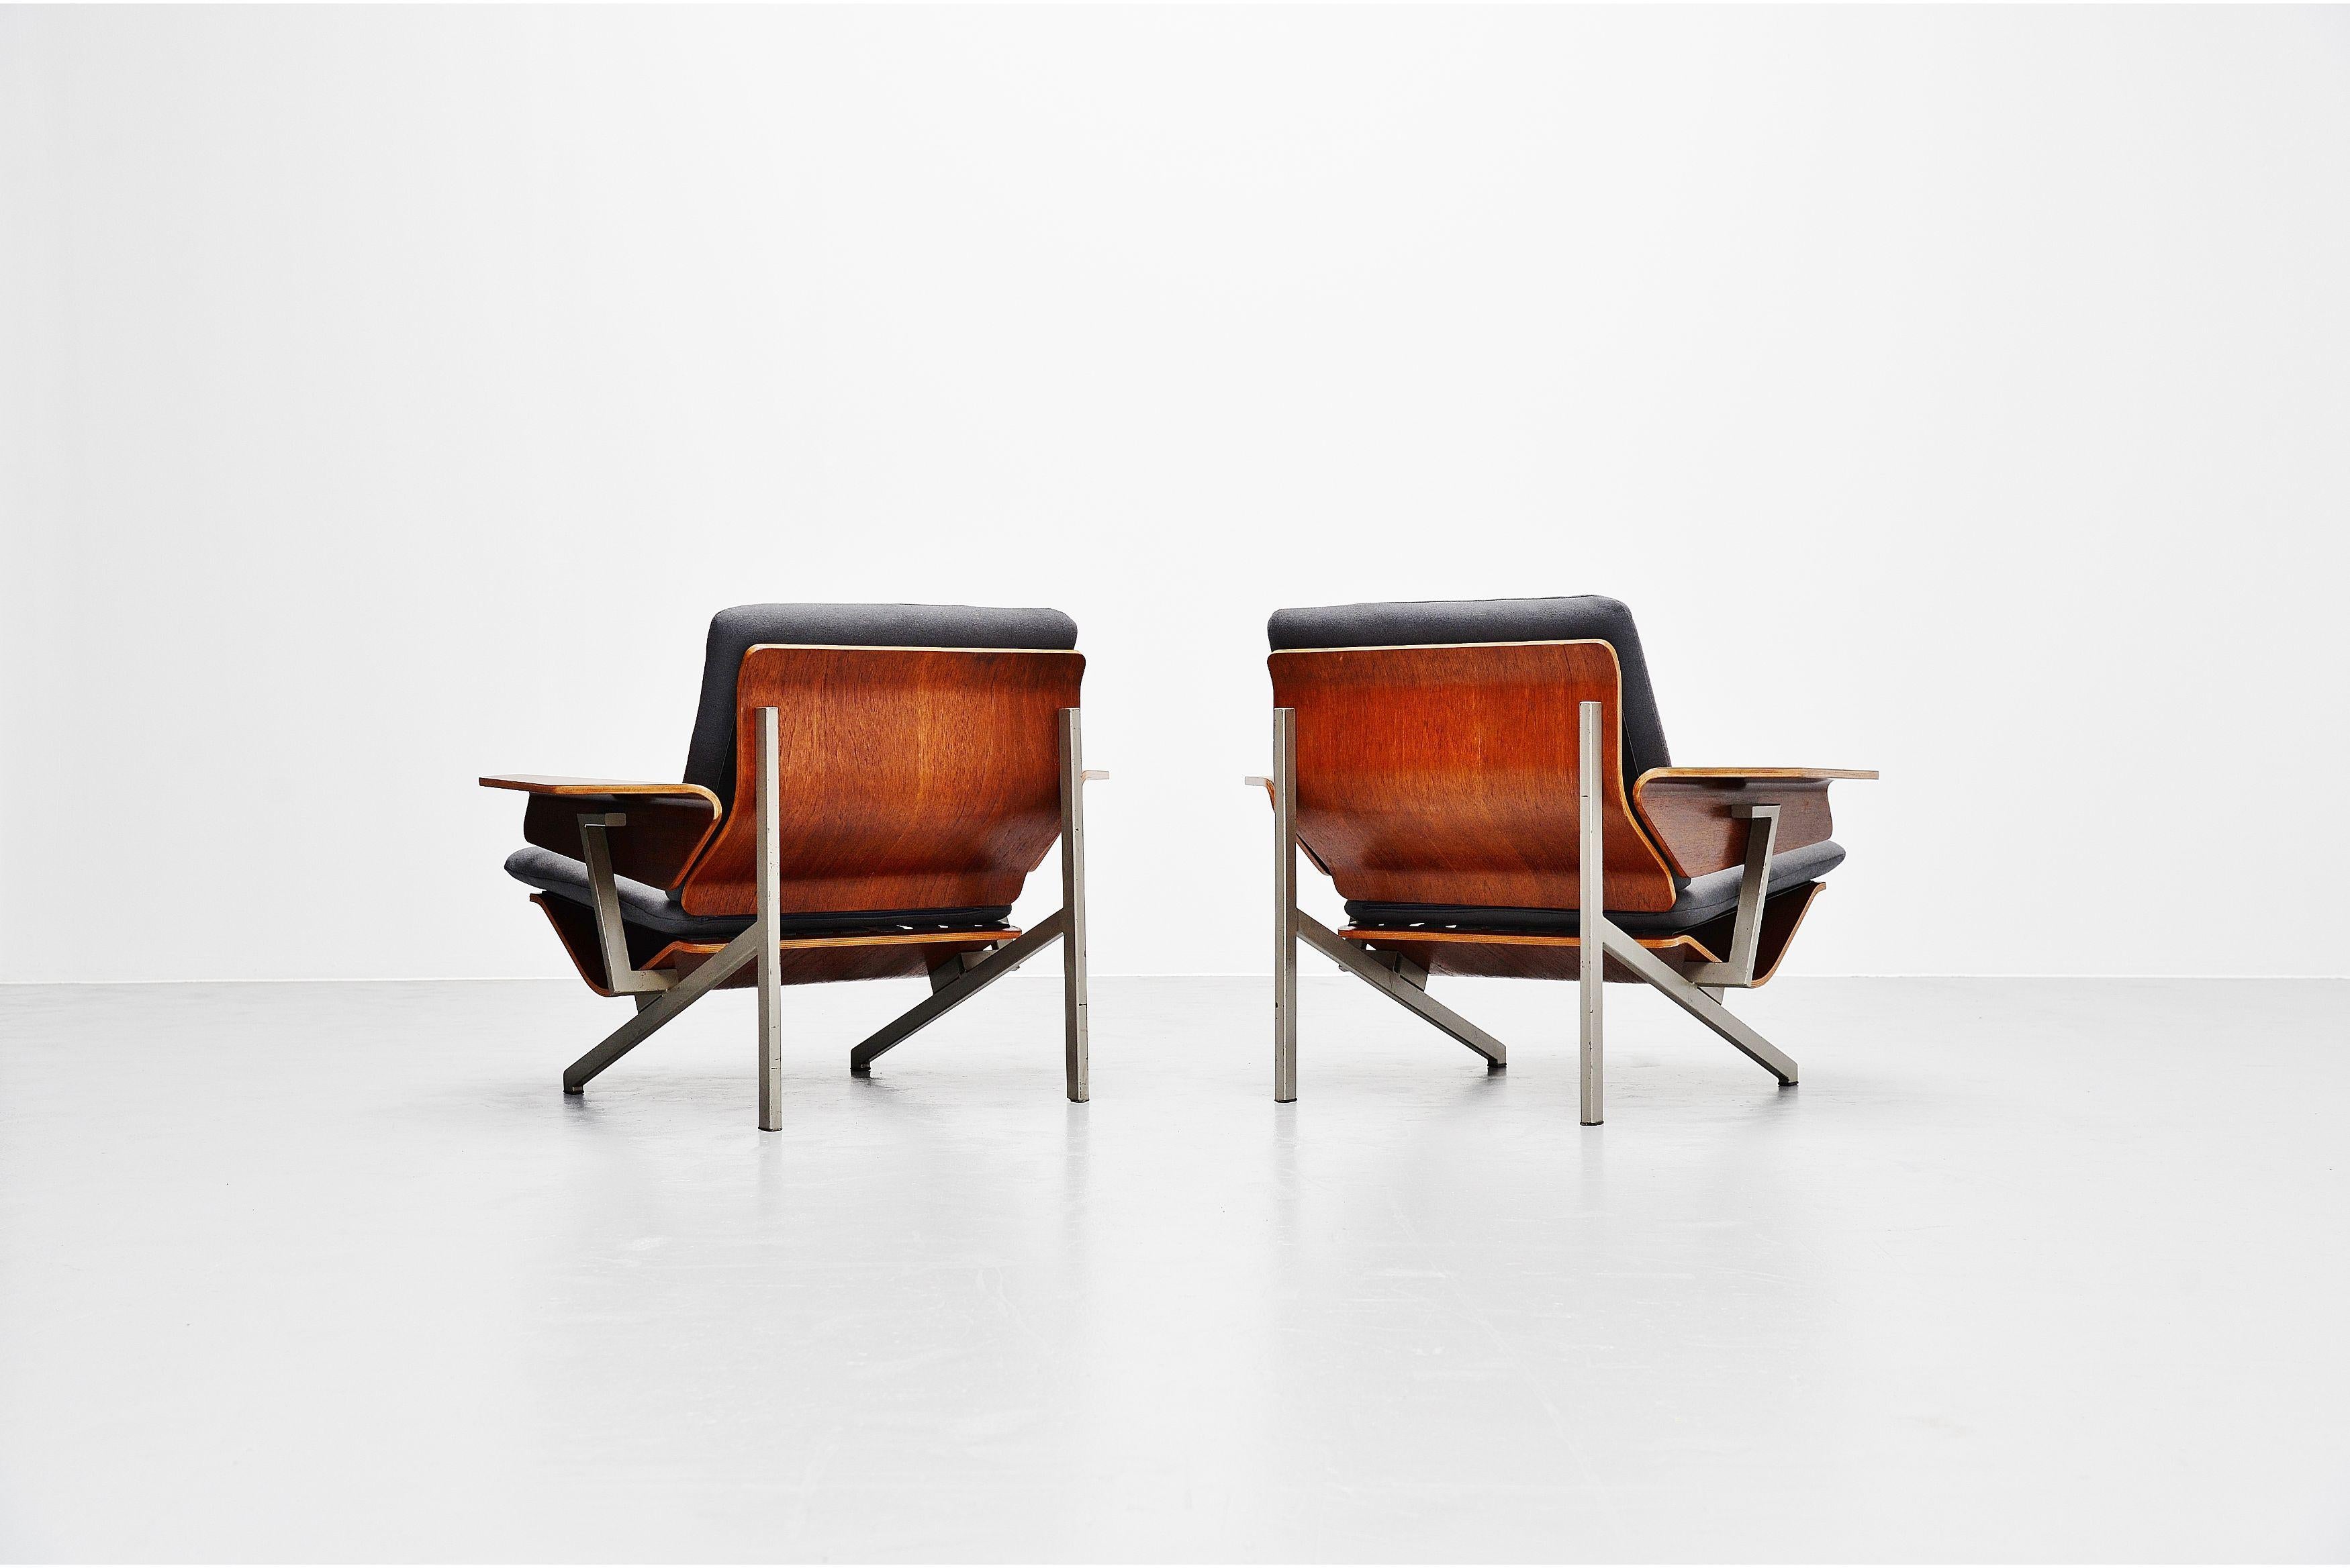 Rare set of lounge chairs model FM50 designed by Cornelis Zitman and manufactured by Pastoe UMS, Holland 1964. The chairs have a grey painted tubular metal frame, the seats and arm rests are made of teak finished plywood, in the seats and backs are